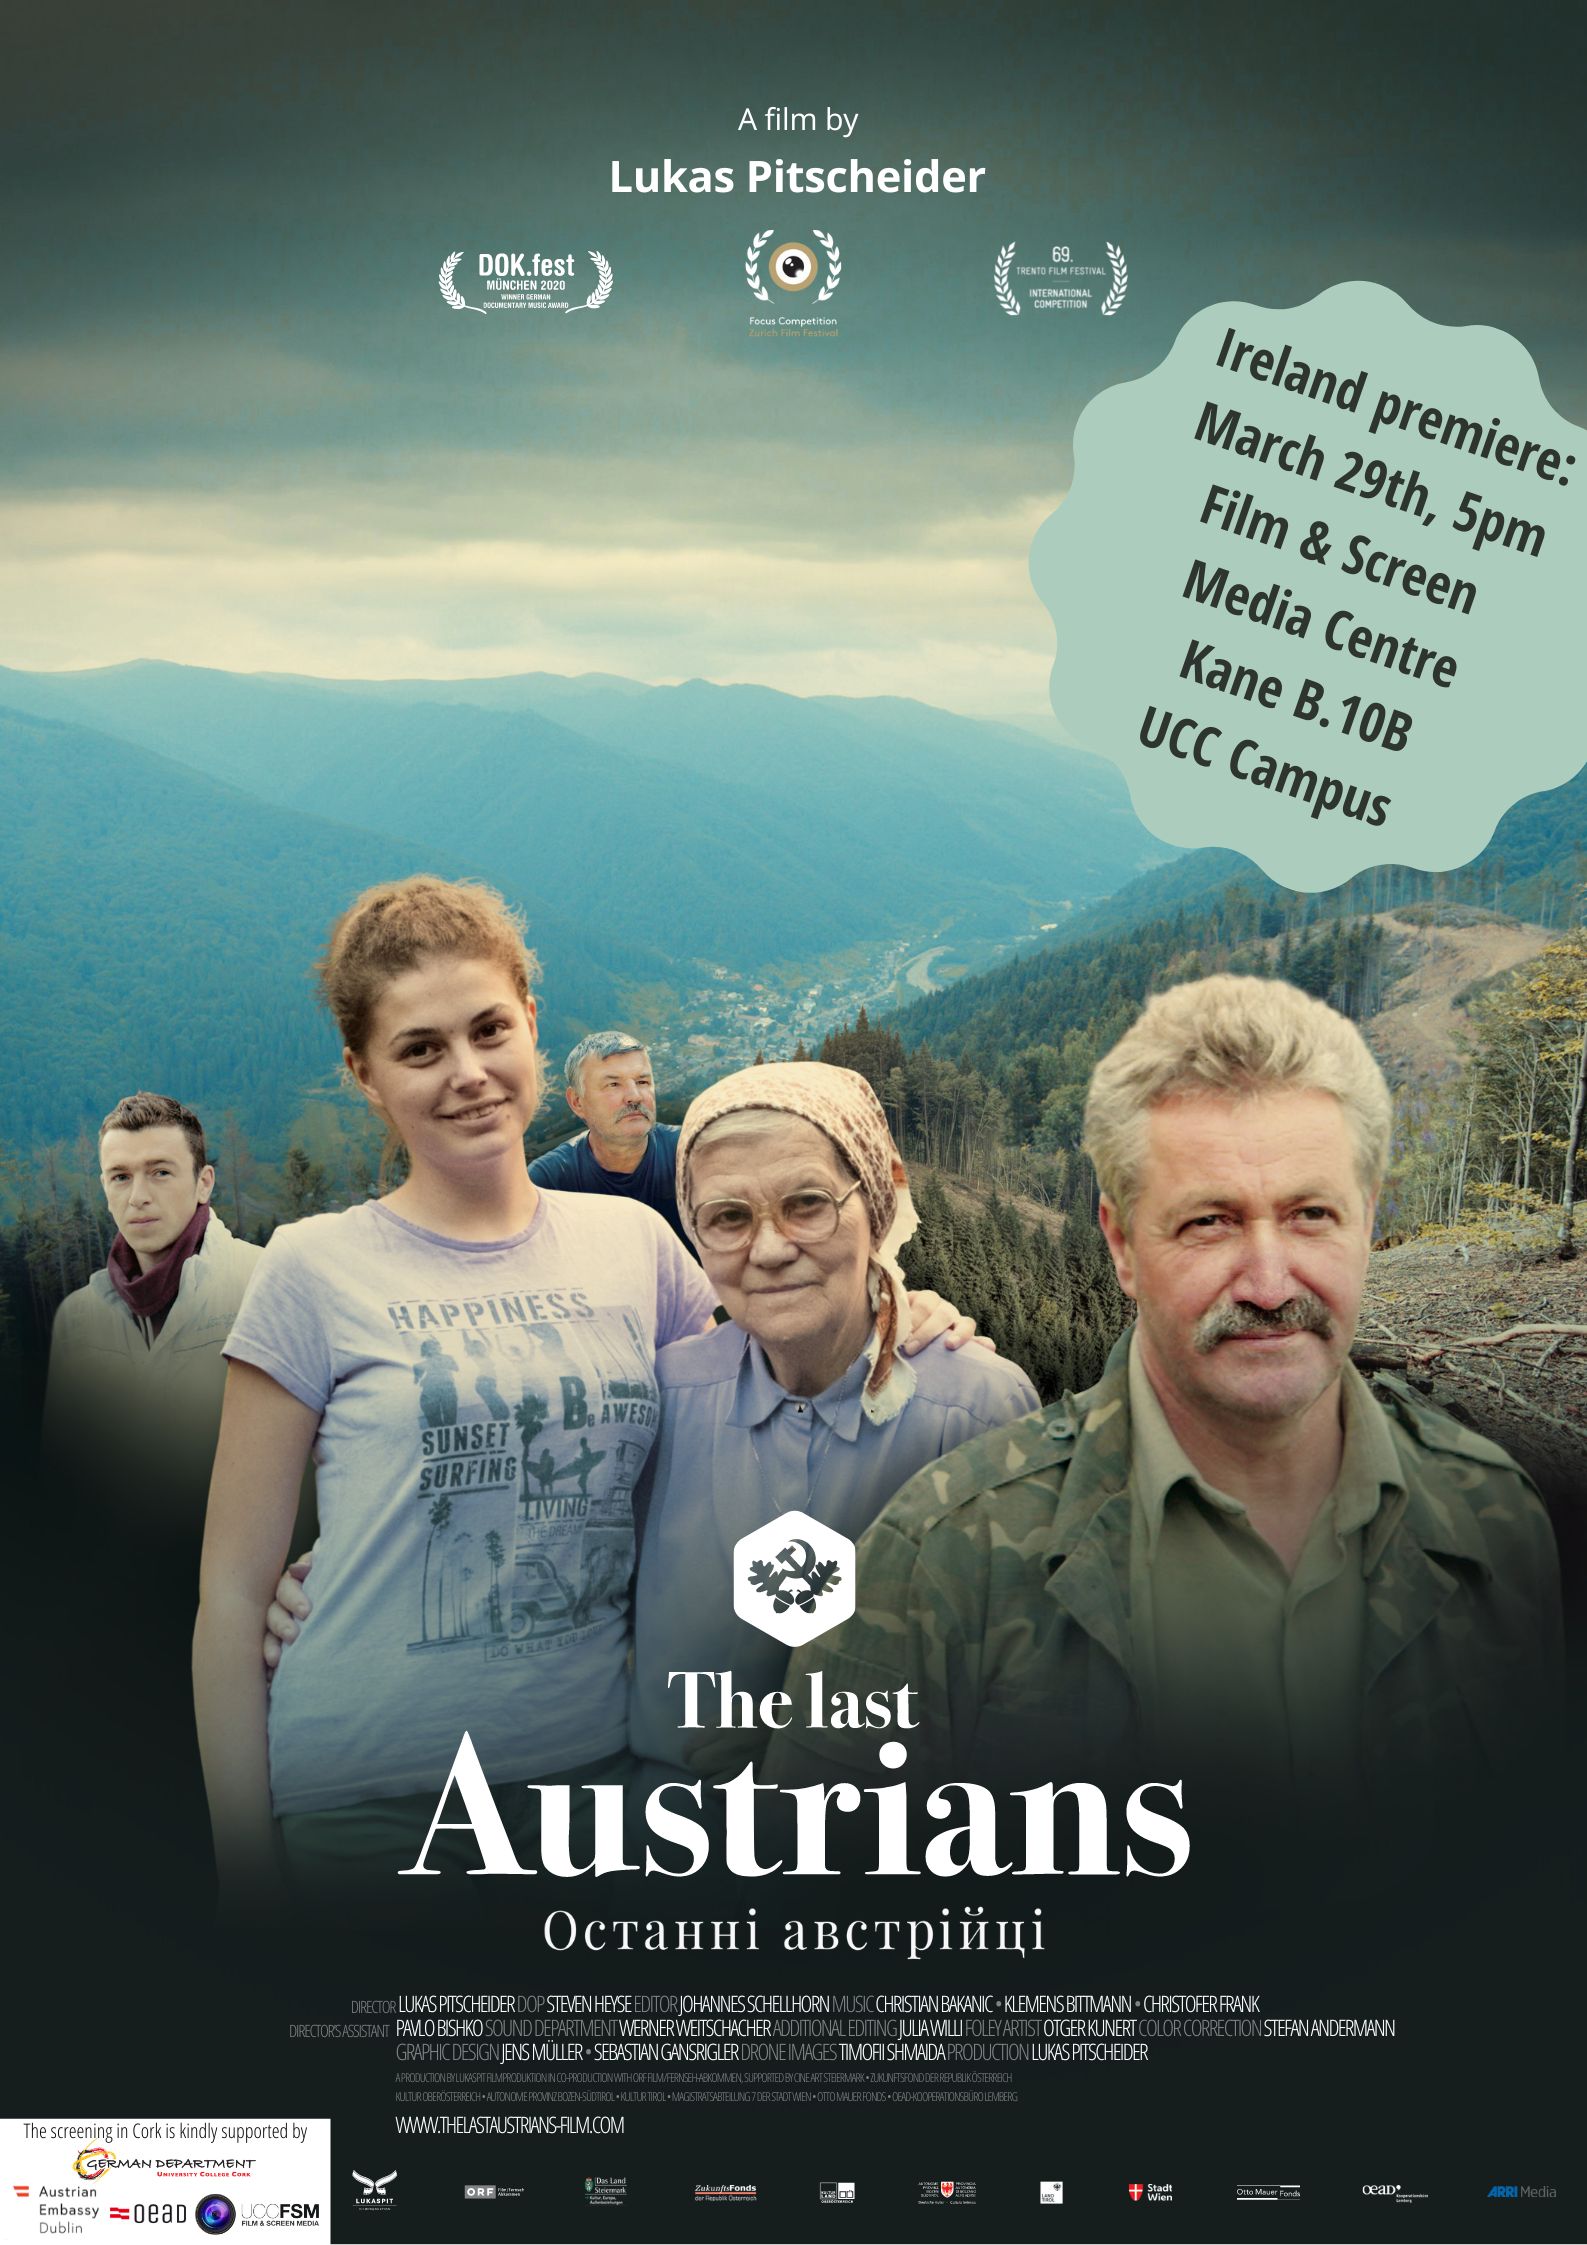 Screening of “The Last Austrians” with director Lukas Pitscheider on 29th March 2023 in Kane B.10B, UCC